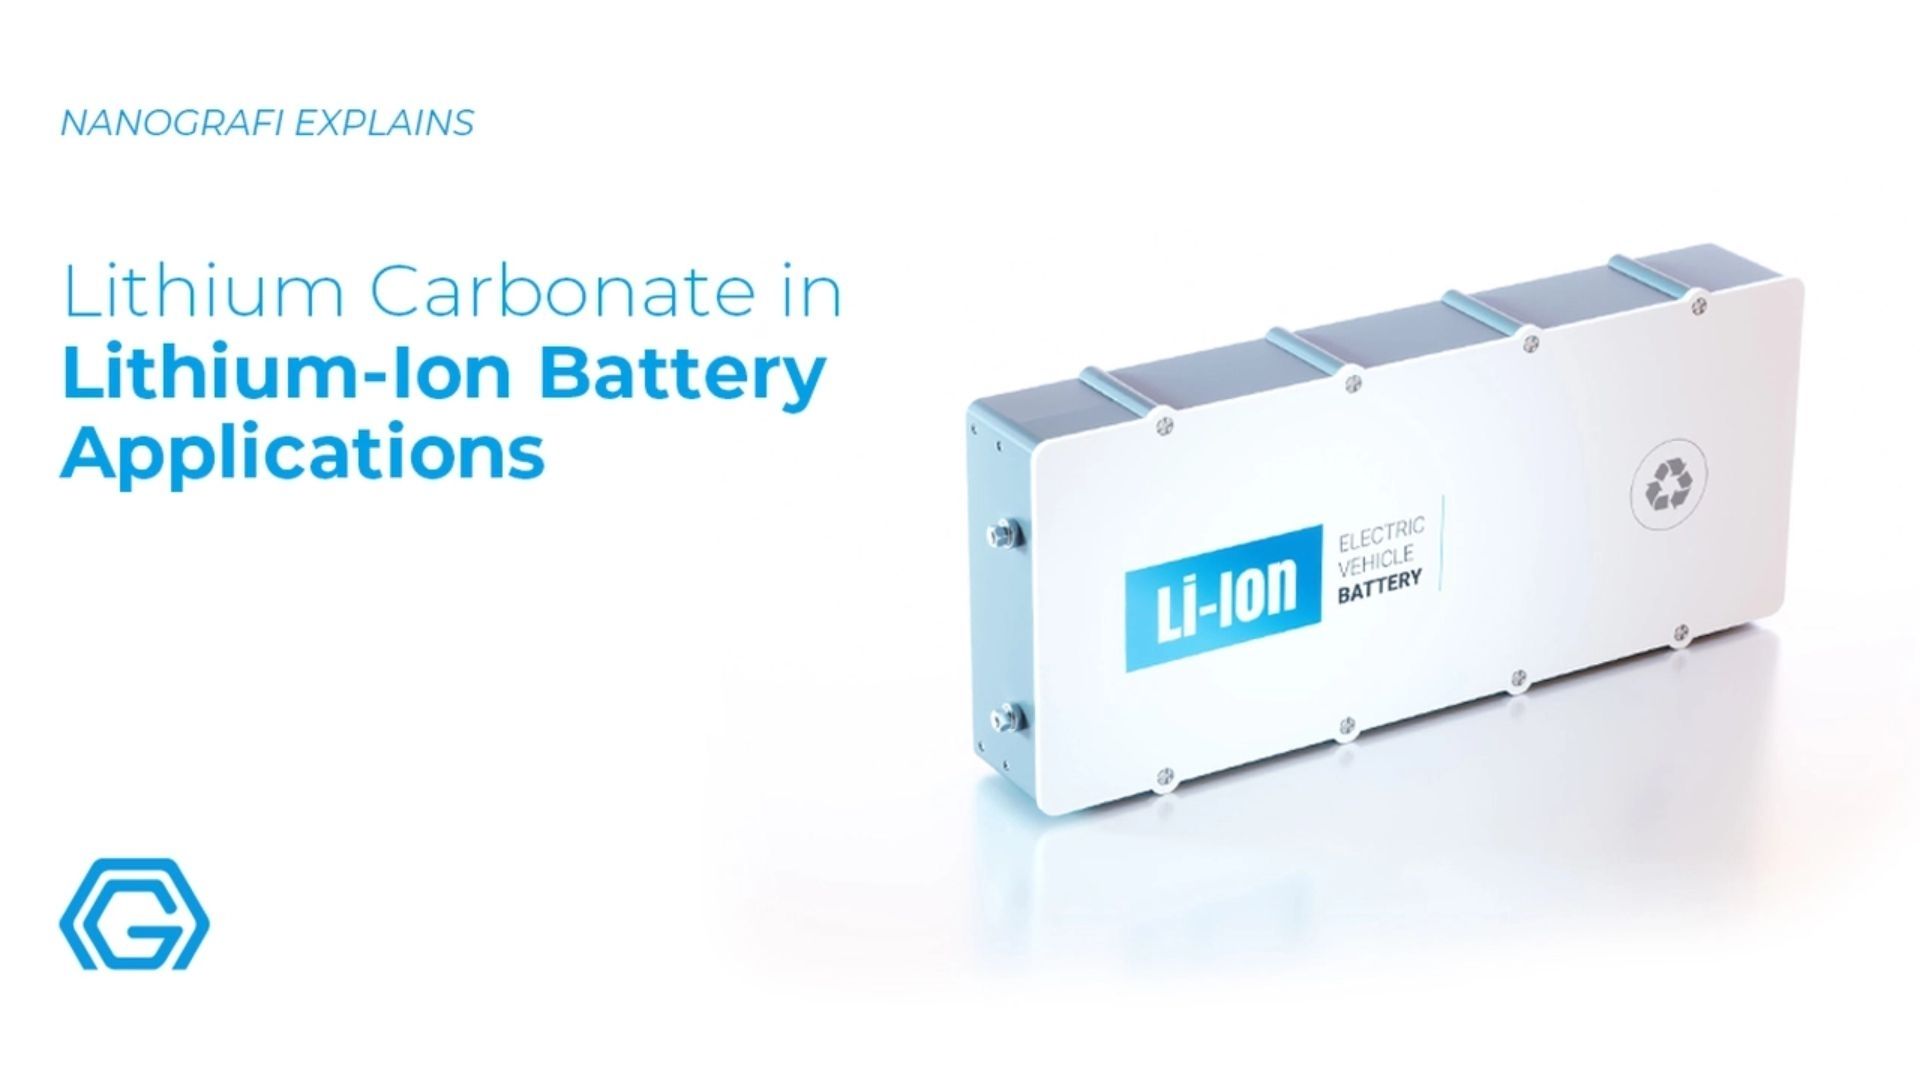 Lithium carbonate in lithium-ion battery applications